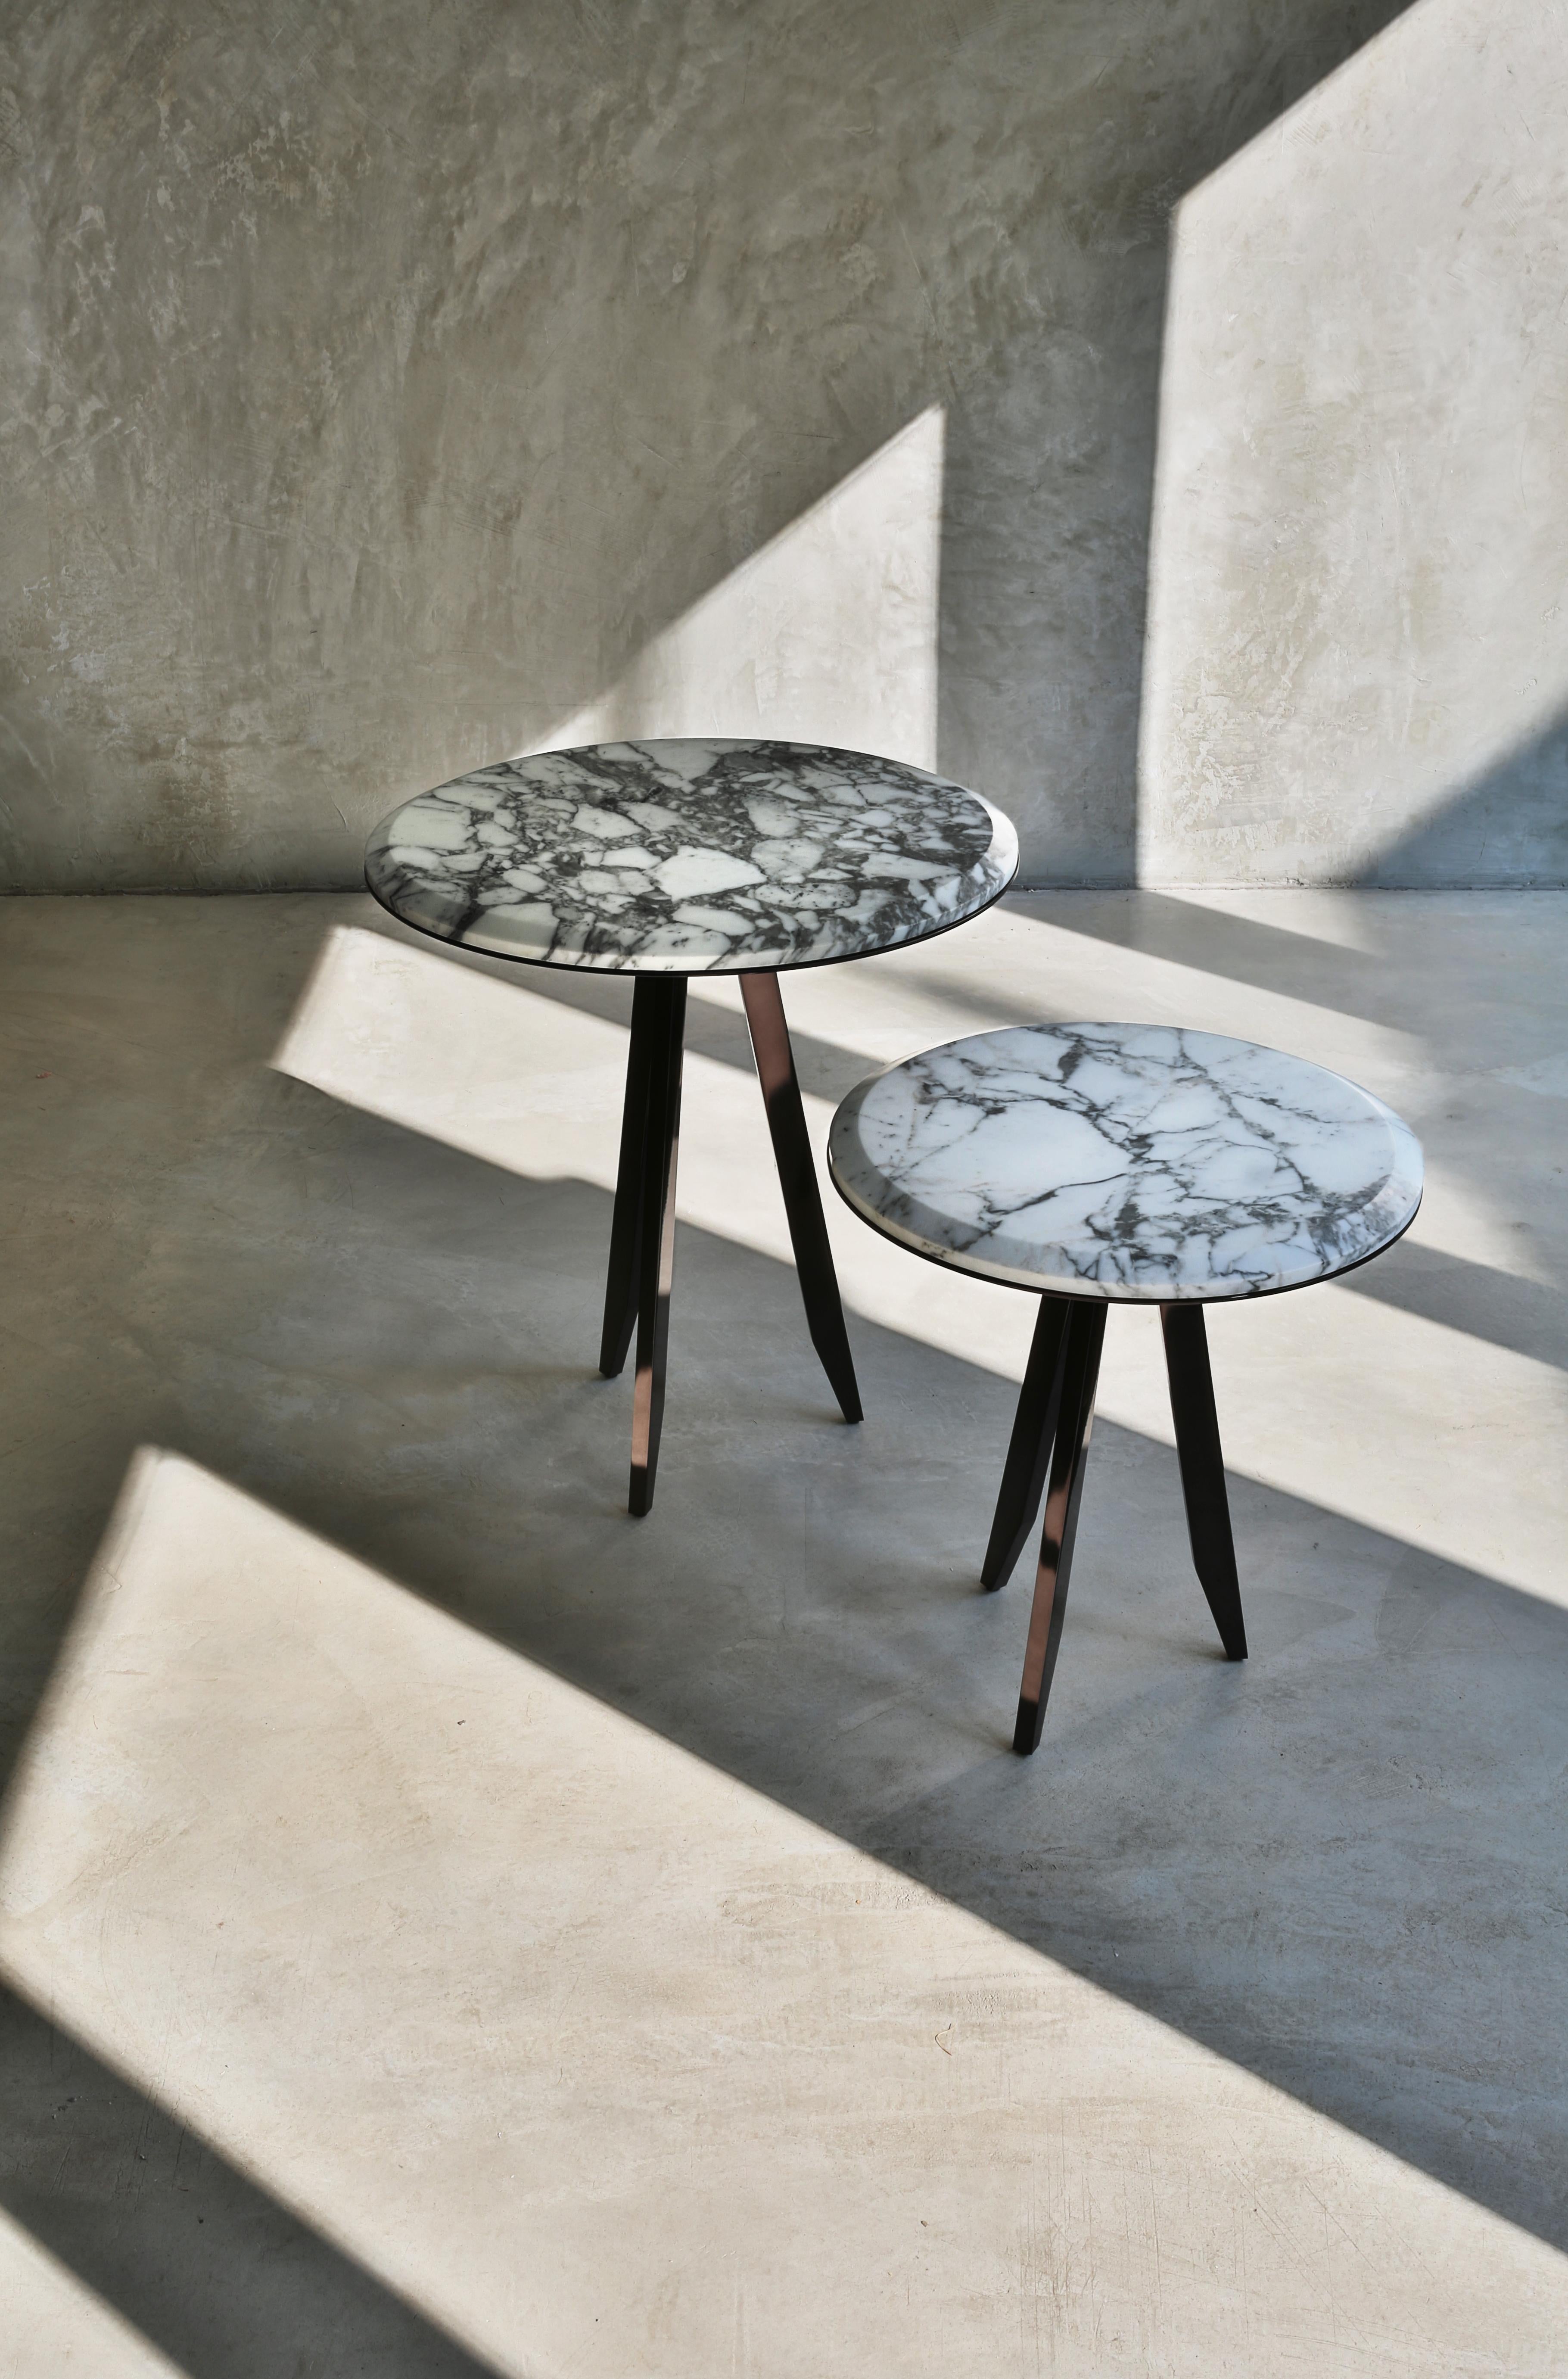 You can also buy them individually, but the Mirage round tables give their best in pairs. For this reason we want to offer you a duo of sure effect: a larger coffee table (50 centimeters in diameter and 54 in height) and a smaller one (40